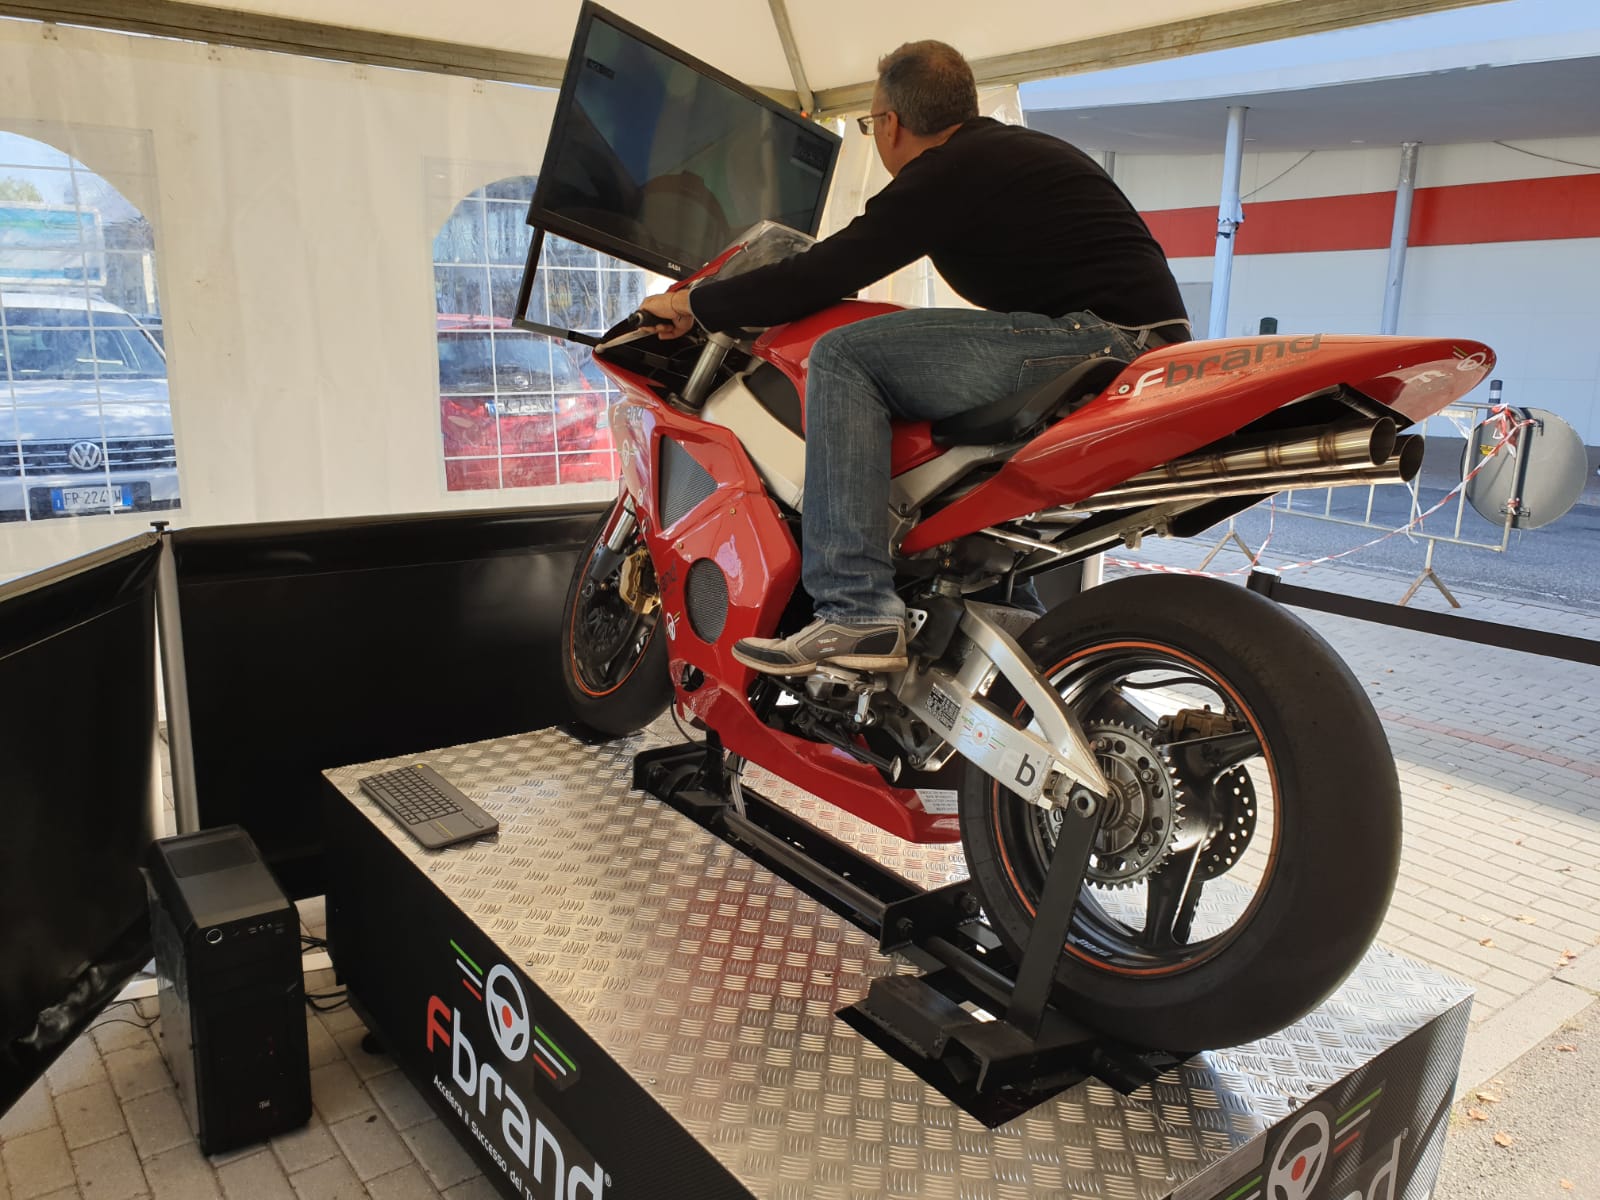 How much does the Dynamic Professional Motorcycle Simulator cost?